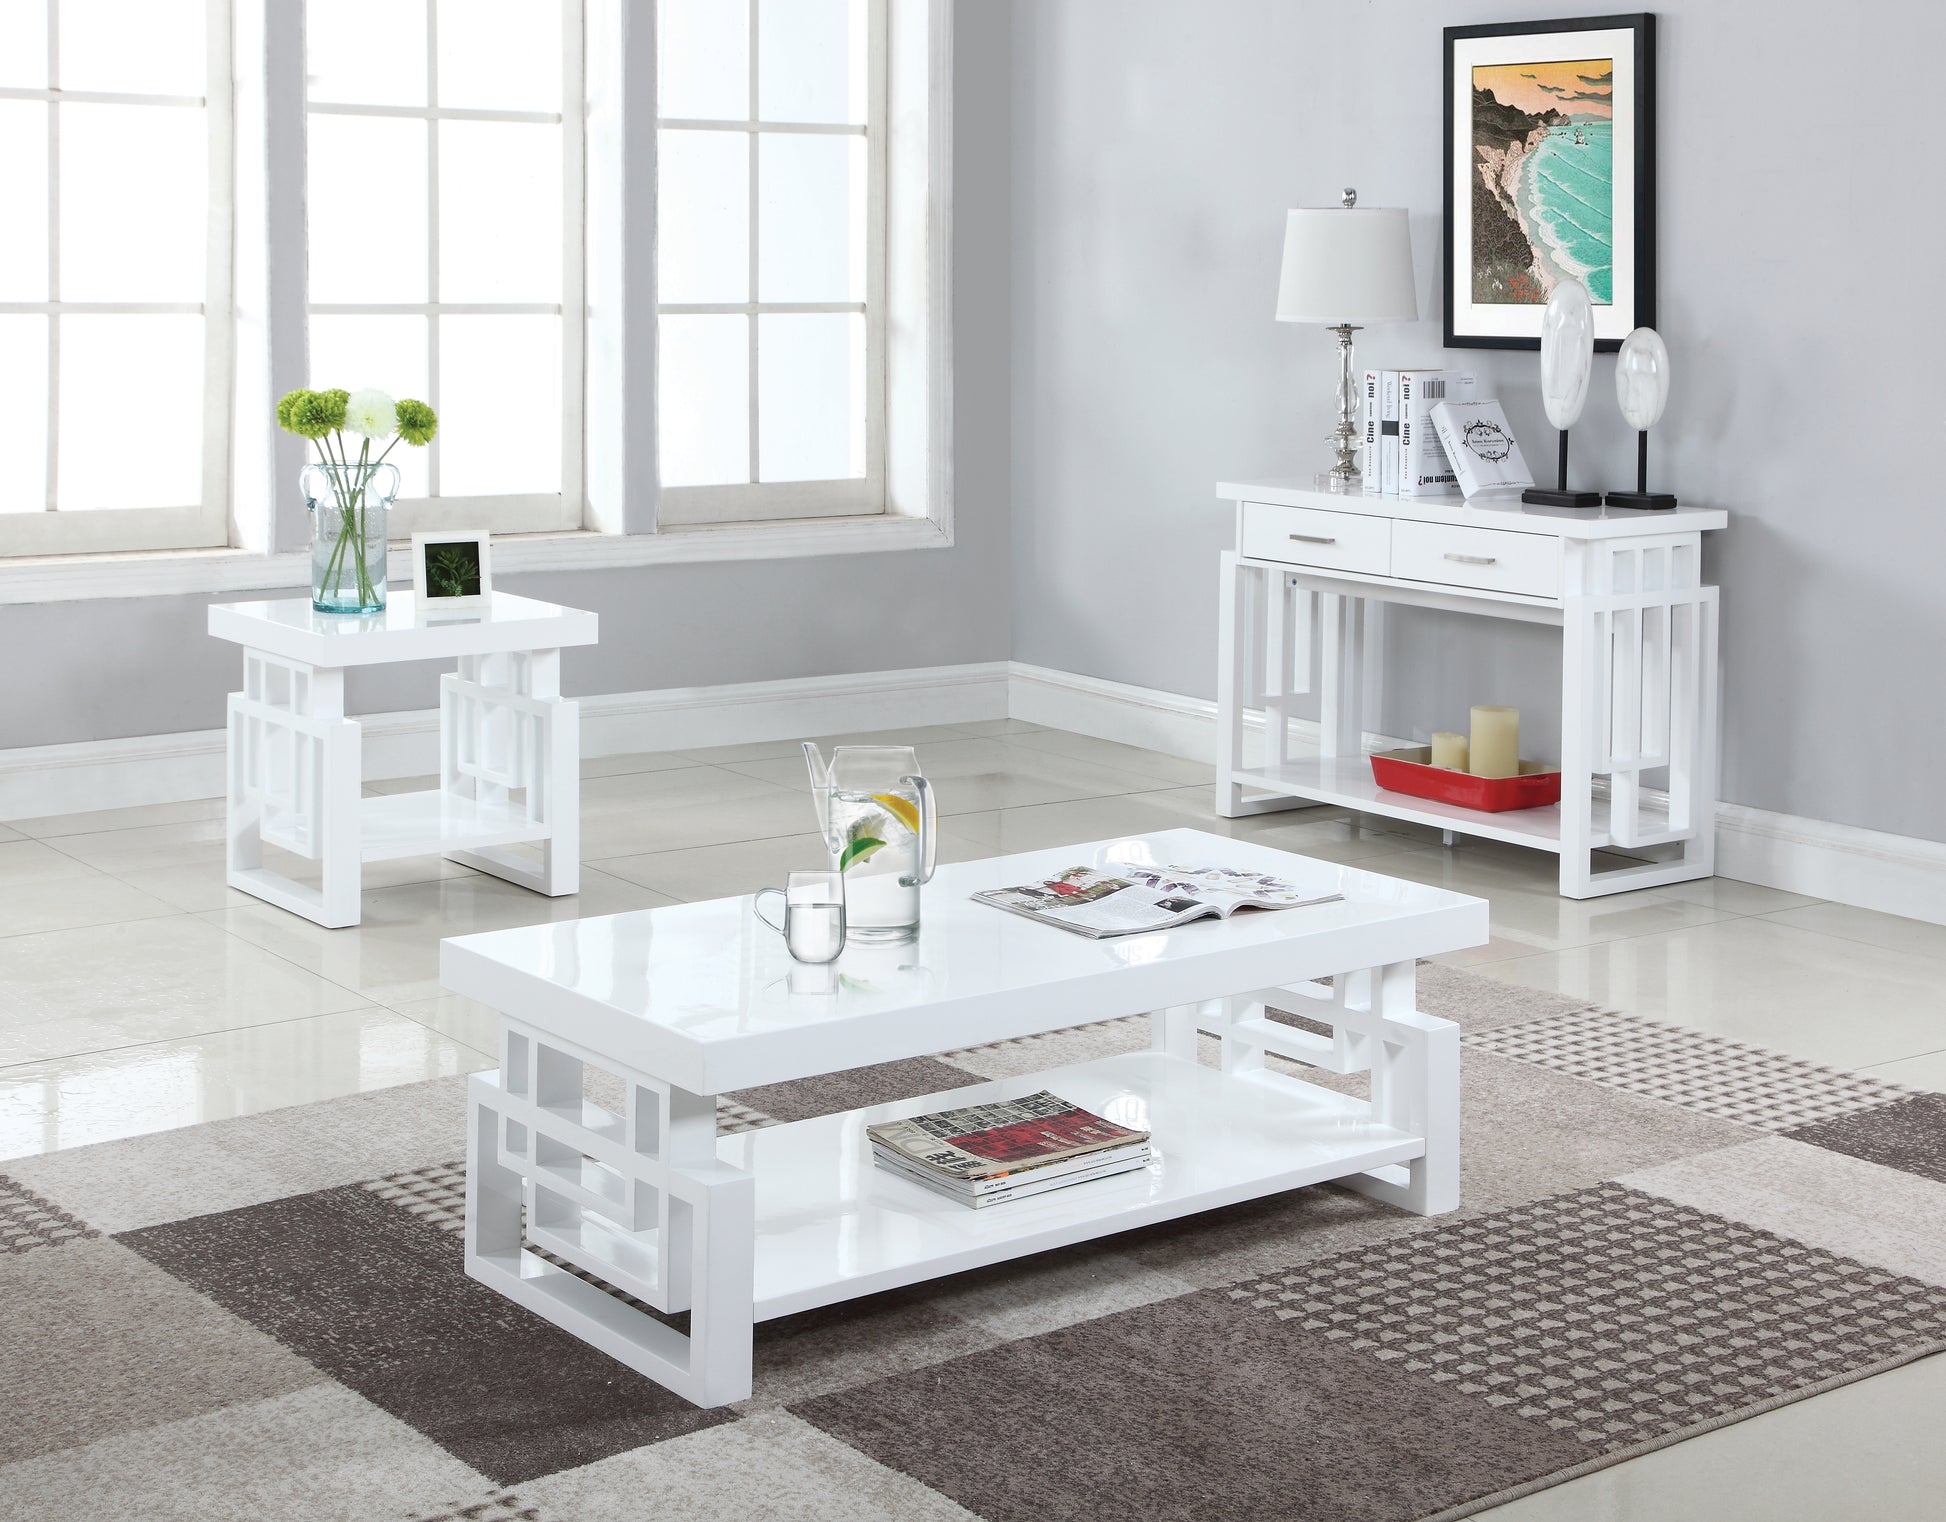 TS7915 - Occasional Table